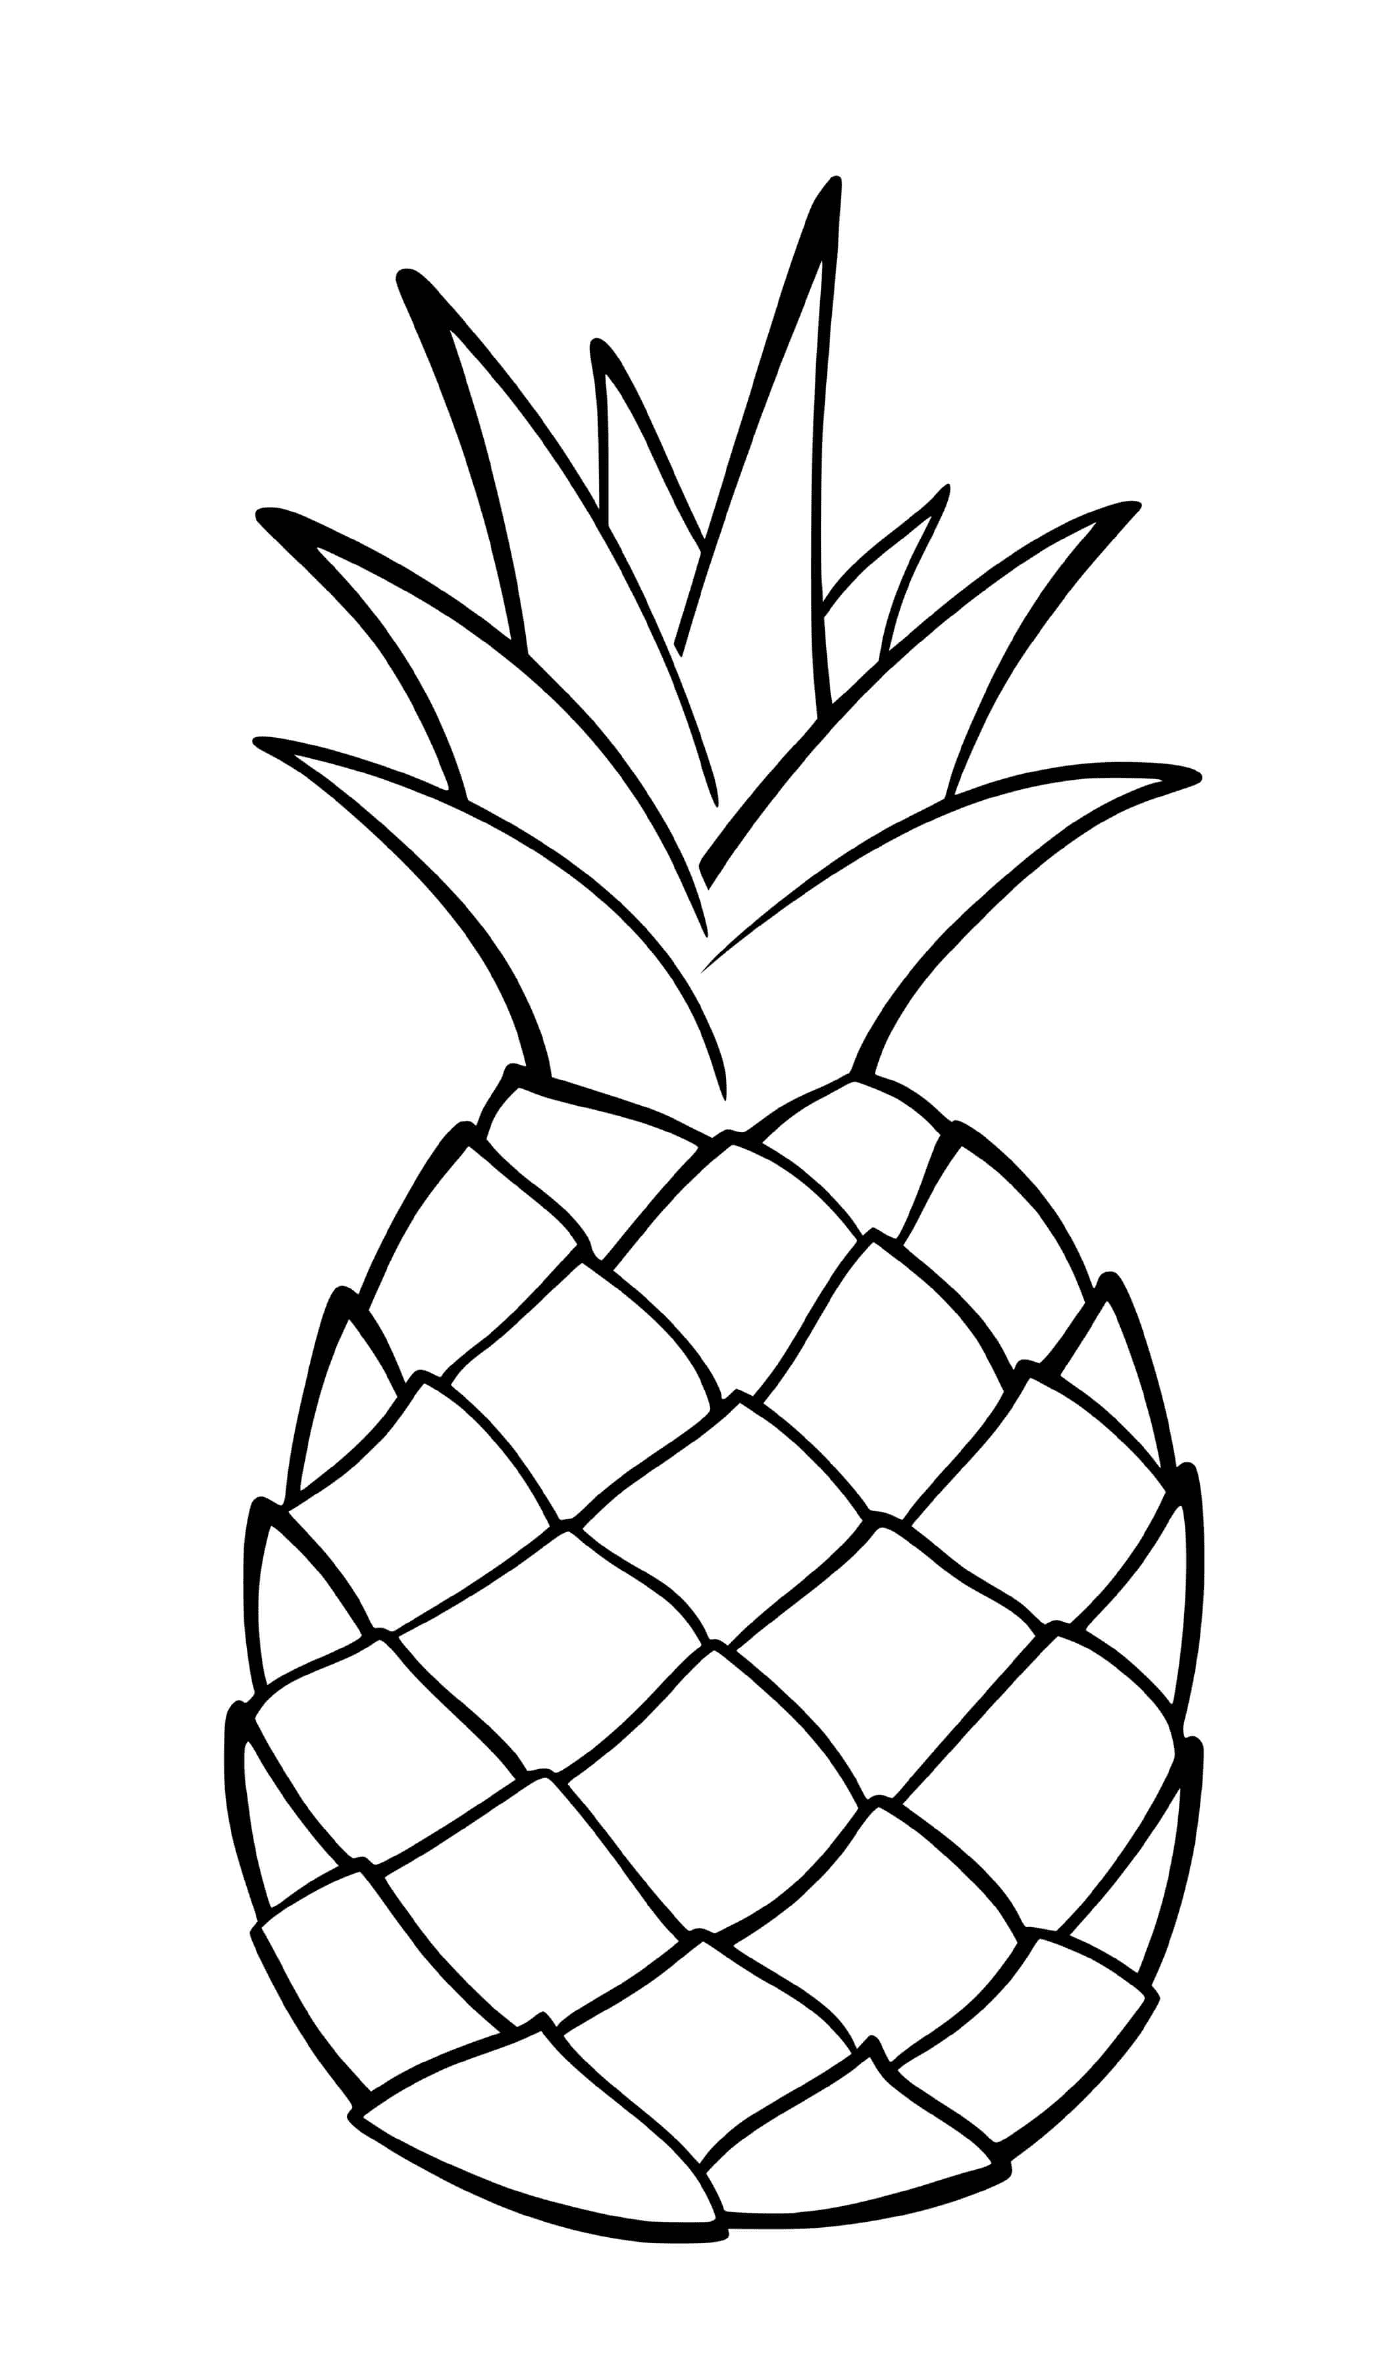  An exotic fruit called pineapple 